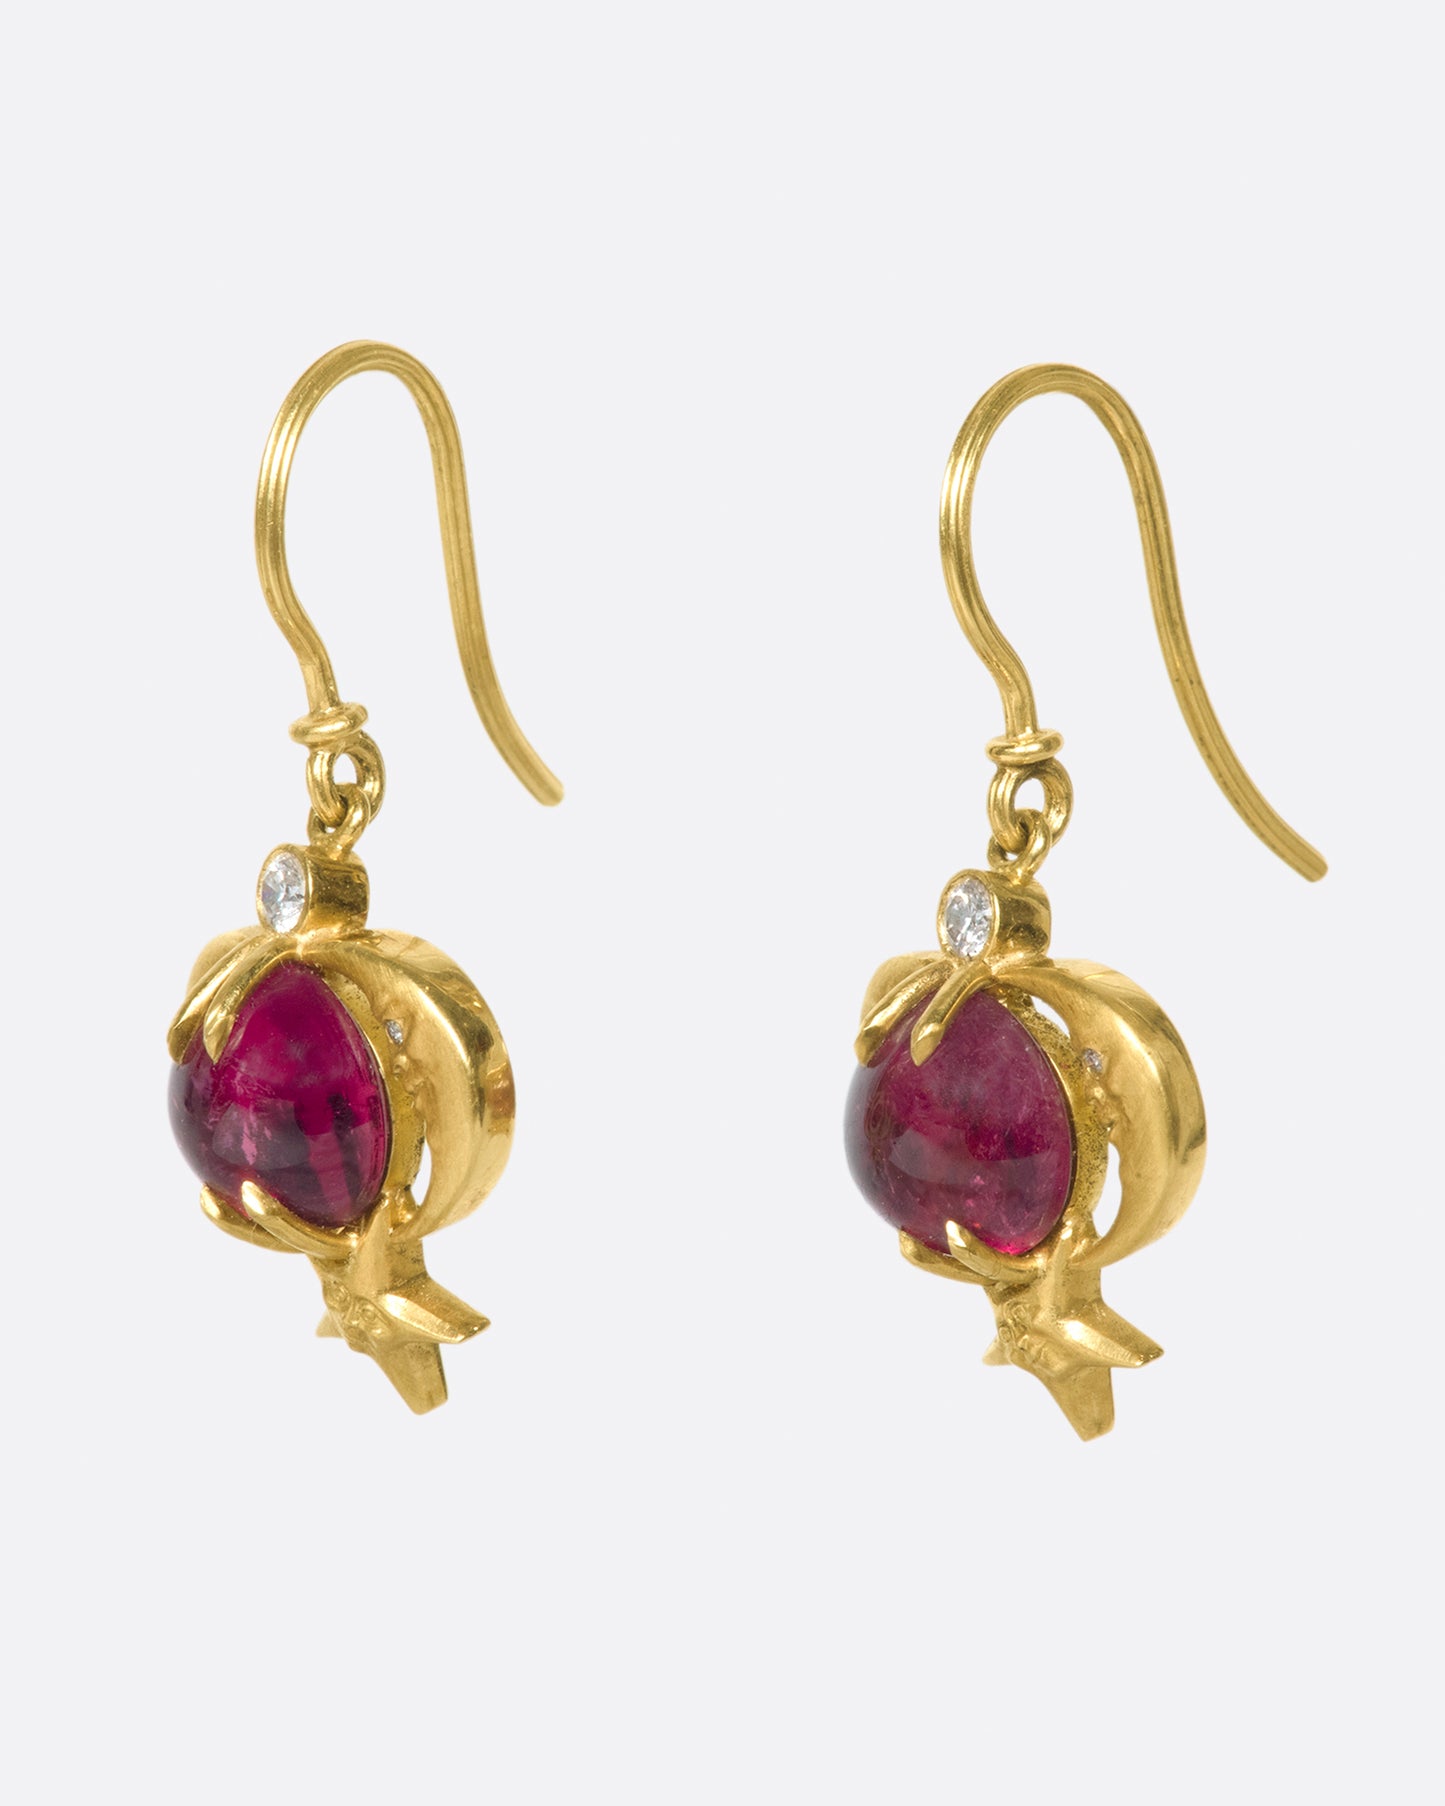 These earrings tell a story about the cosmos; a journey through the heavens and through the history of art.